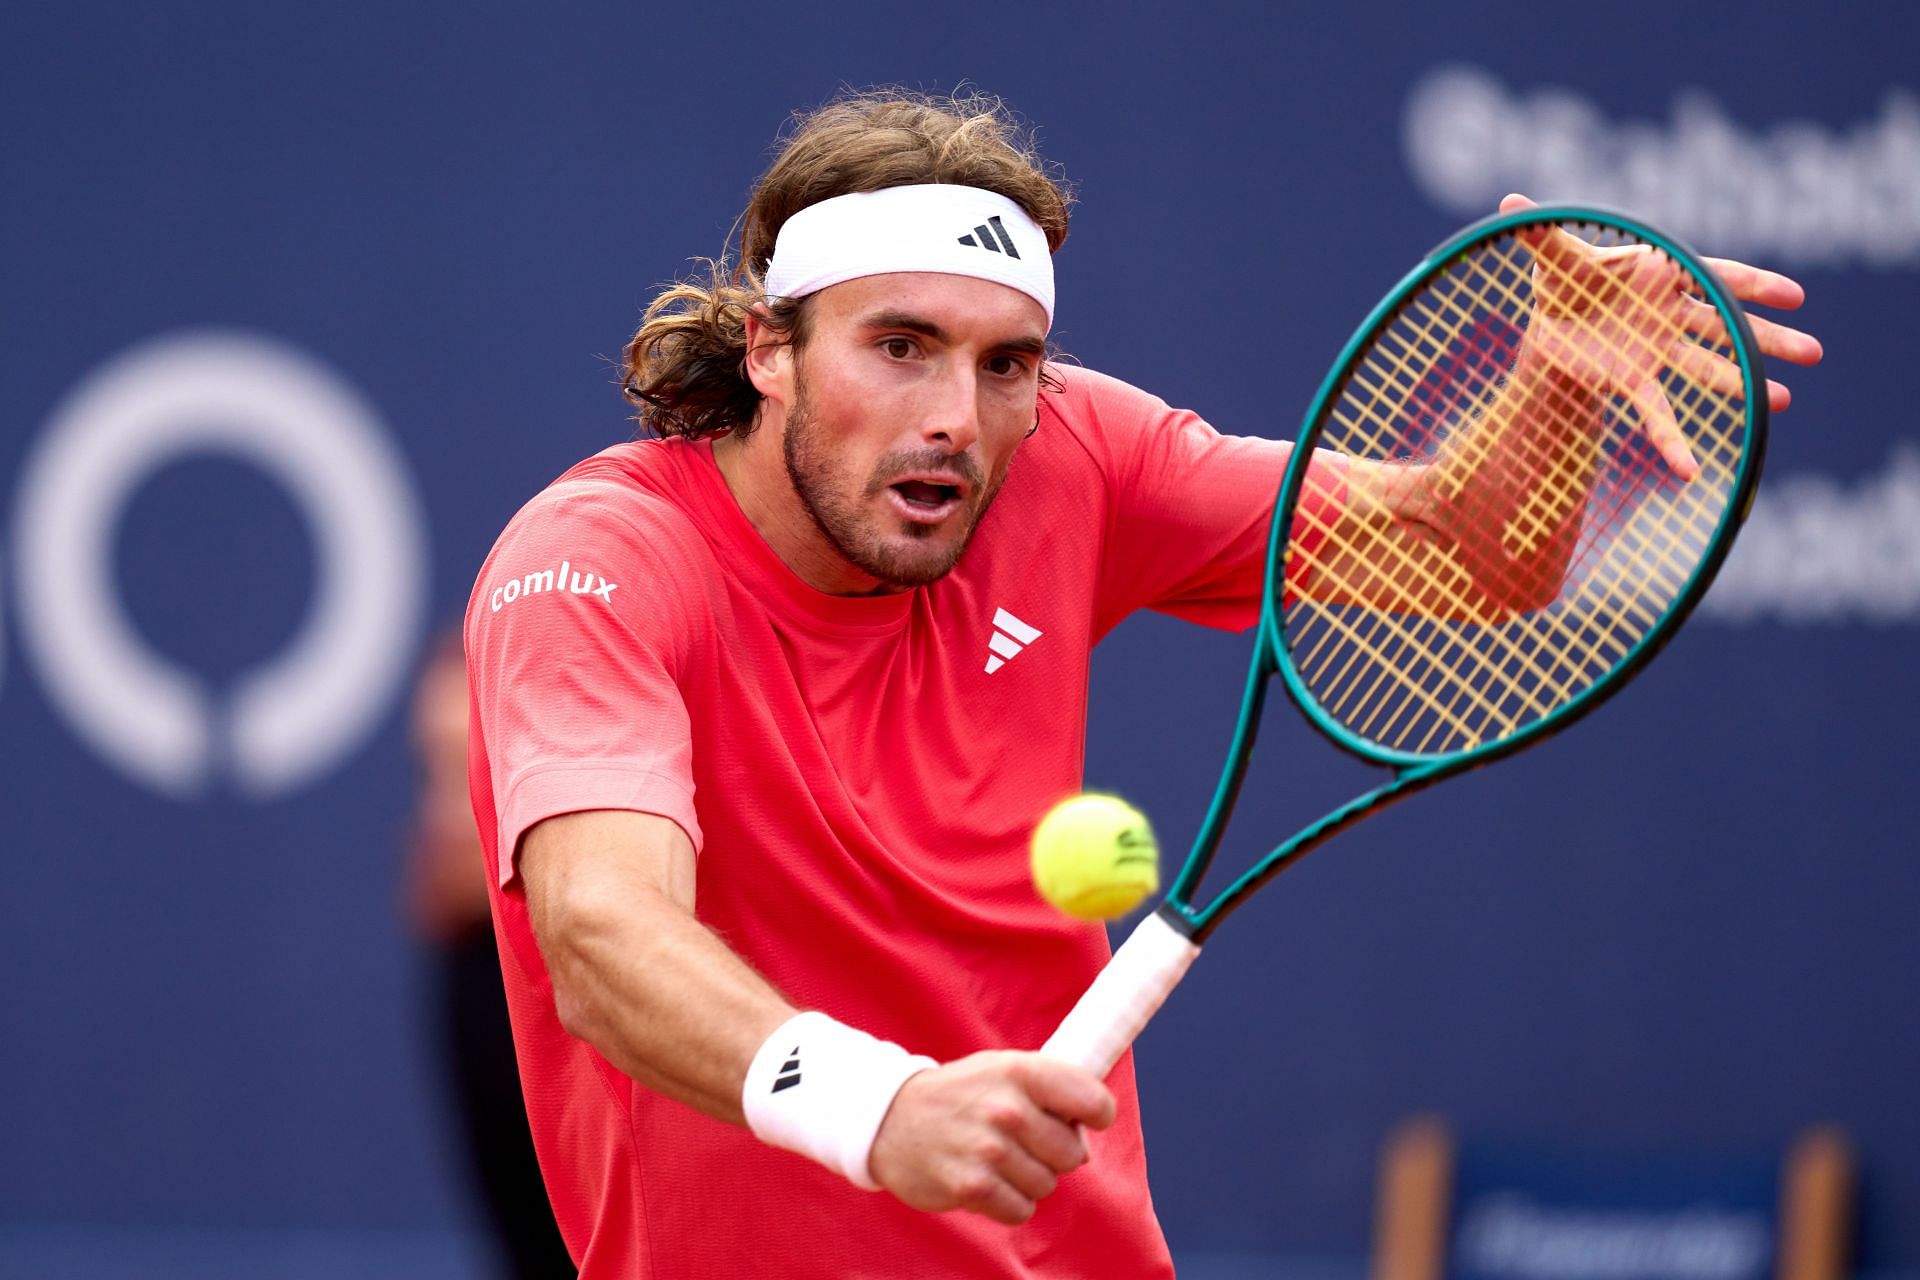 Stefanos Tsitsipas in action at the Barcelona Open